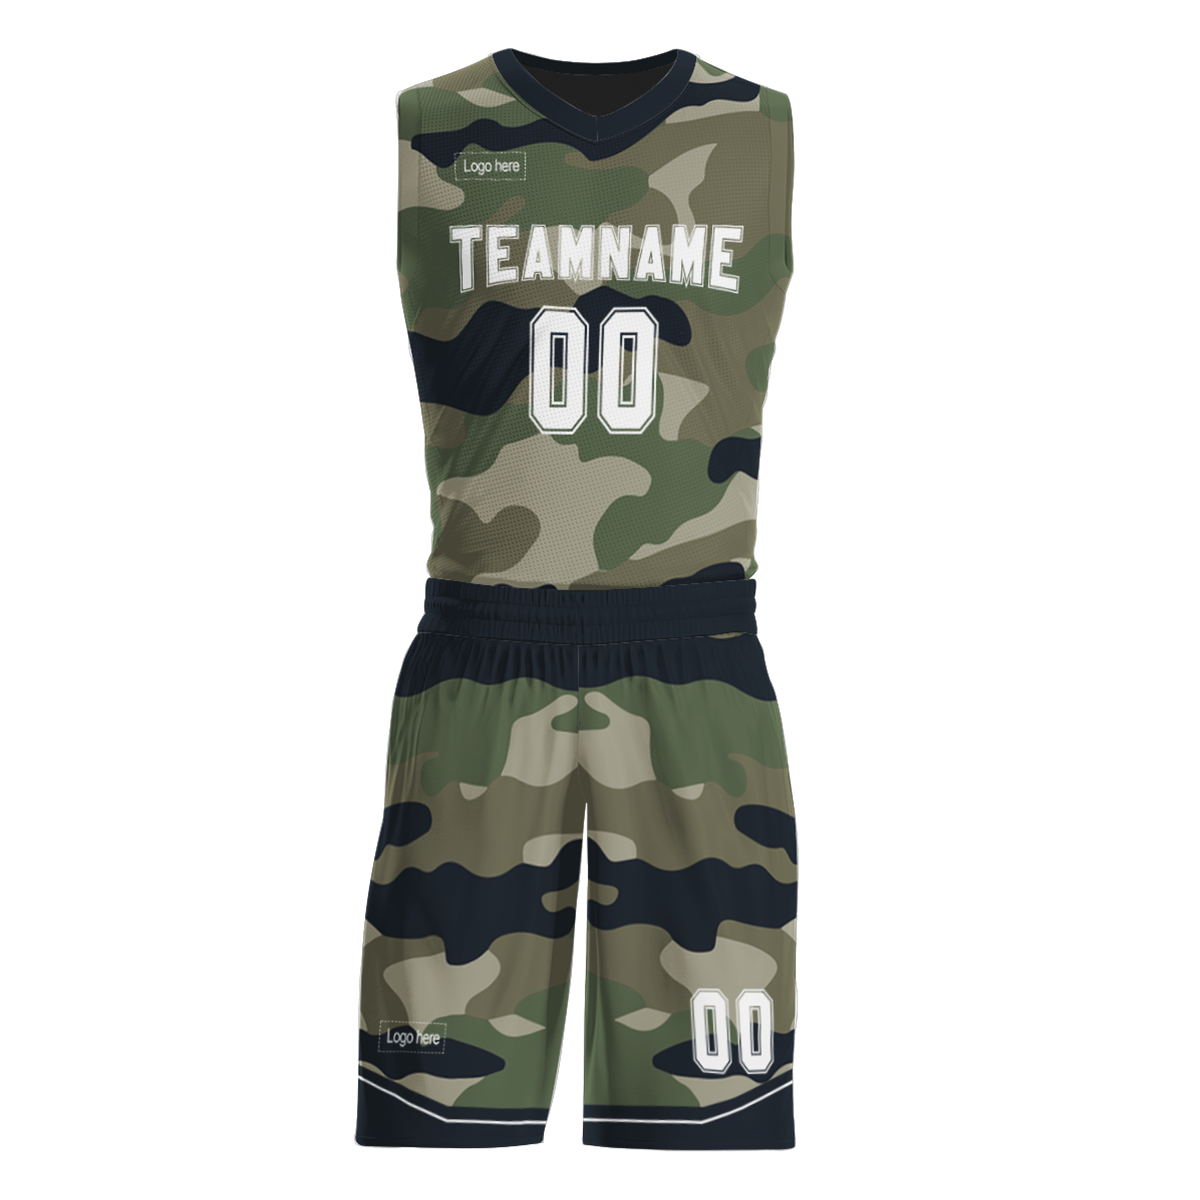 Customized Basketball Uniforms Personalized Design Printing Sport Clothes Summer Basketball Jerseys For Men